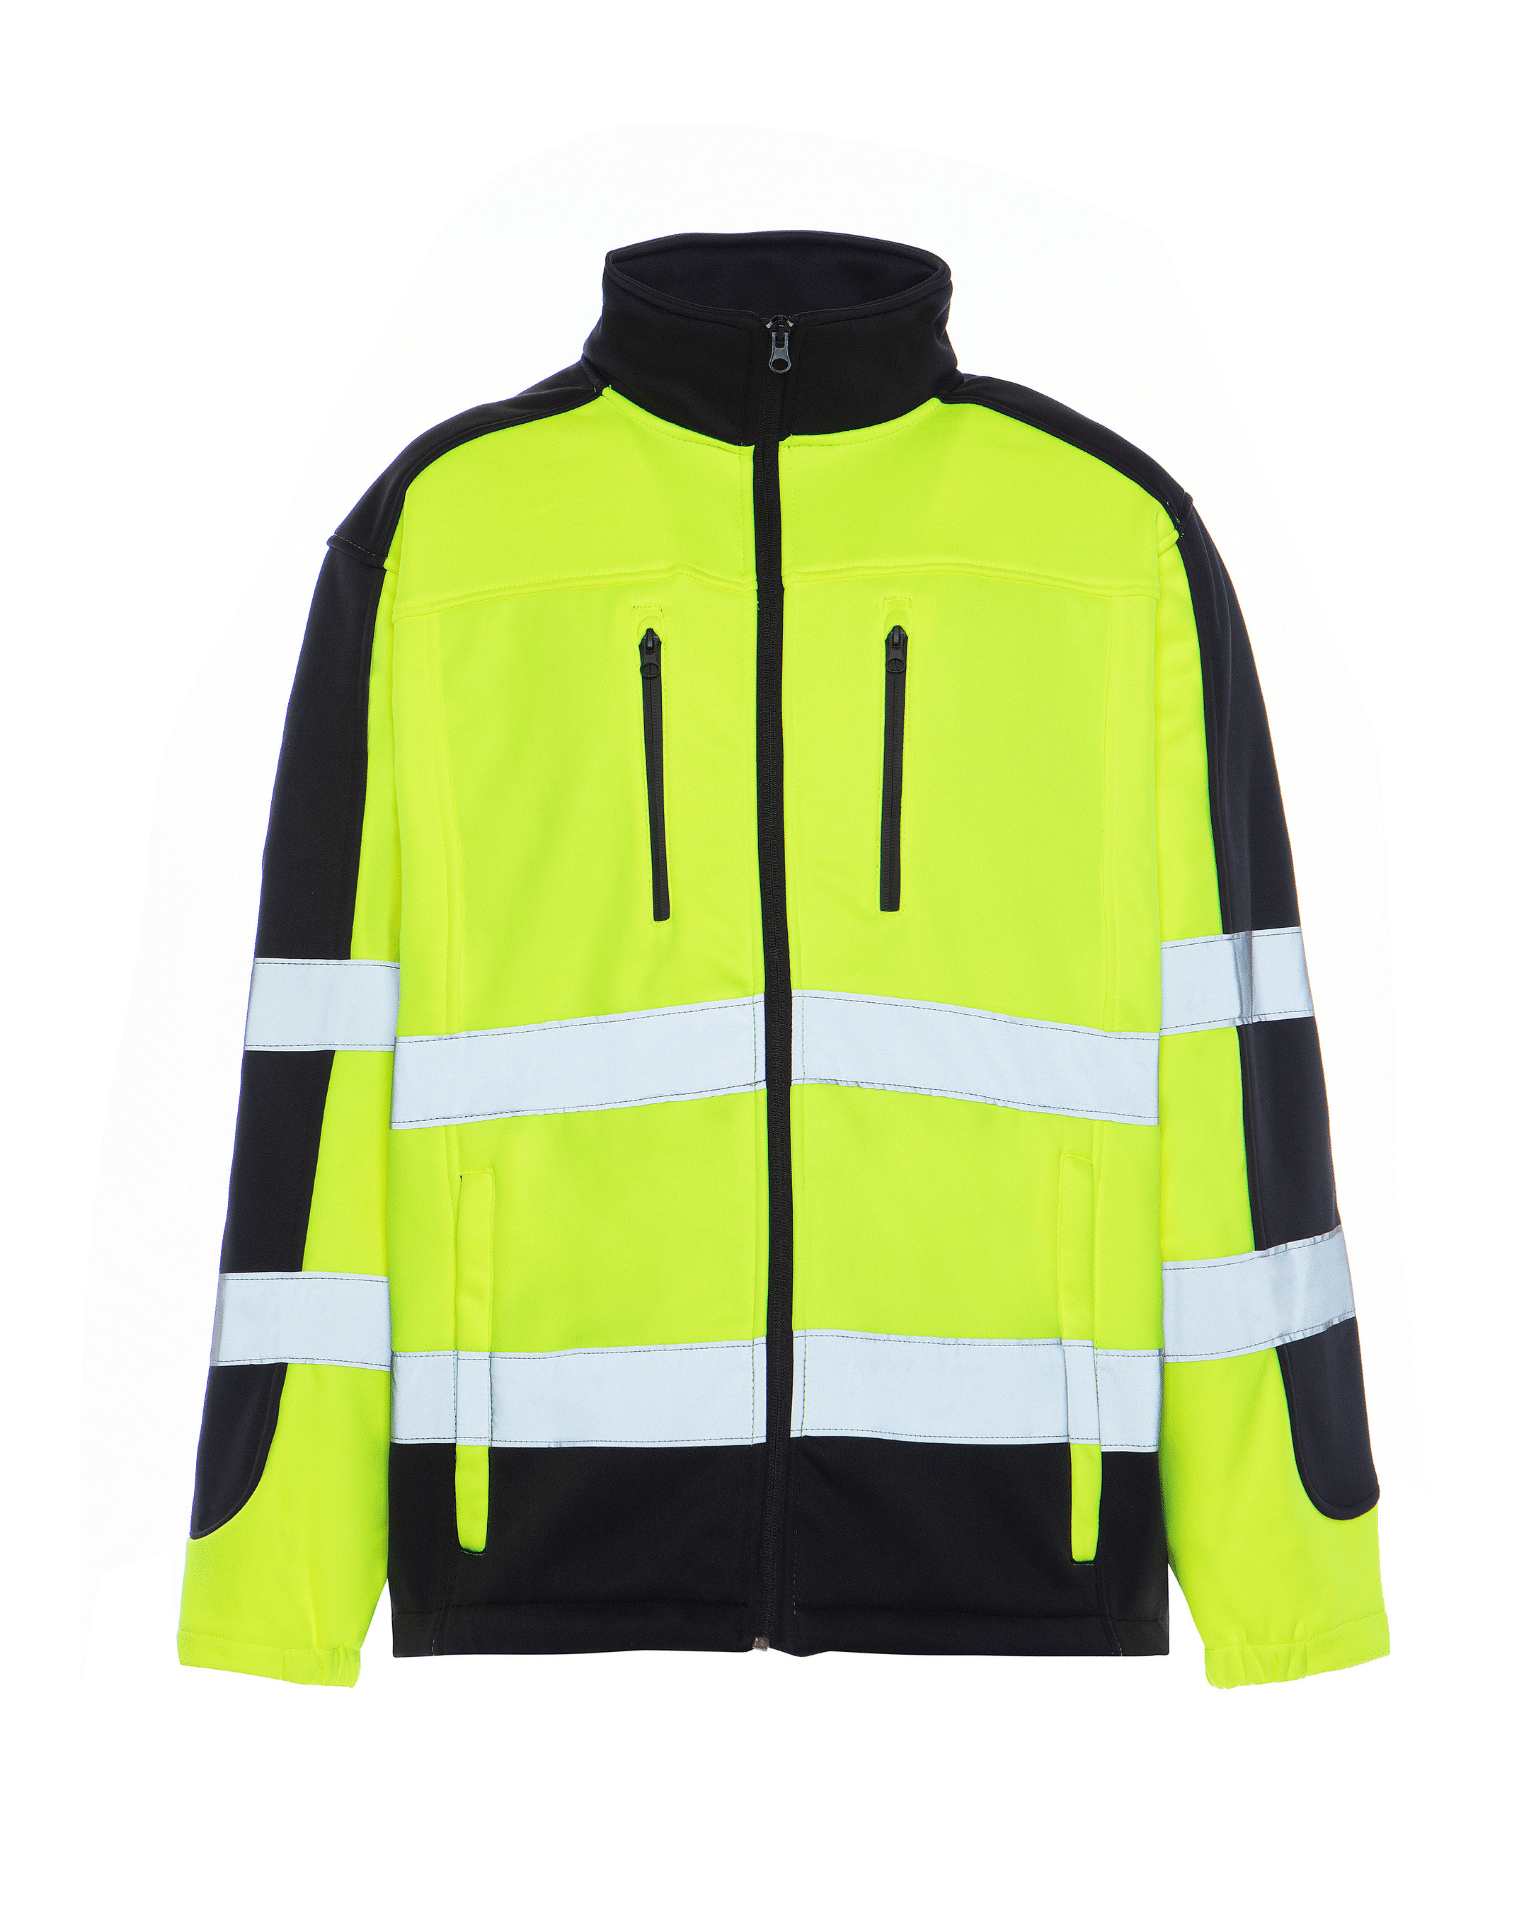 ANSI Class 3 reflective jacket soft shell liquid and stain repellent treated with teflon by Utility Pro